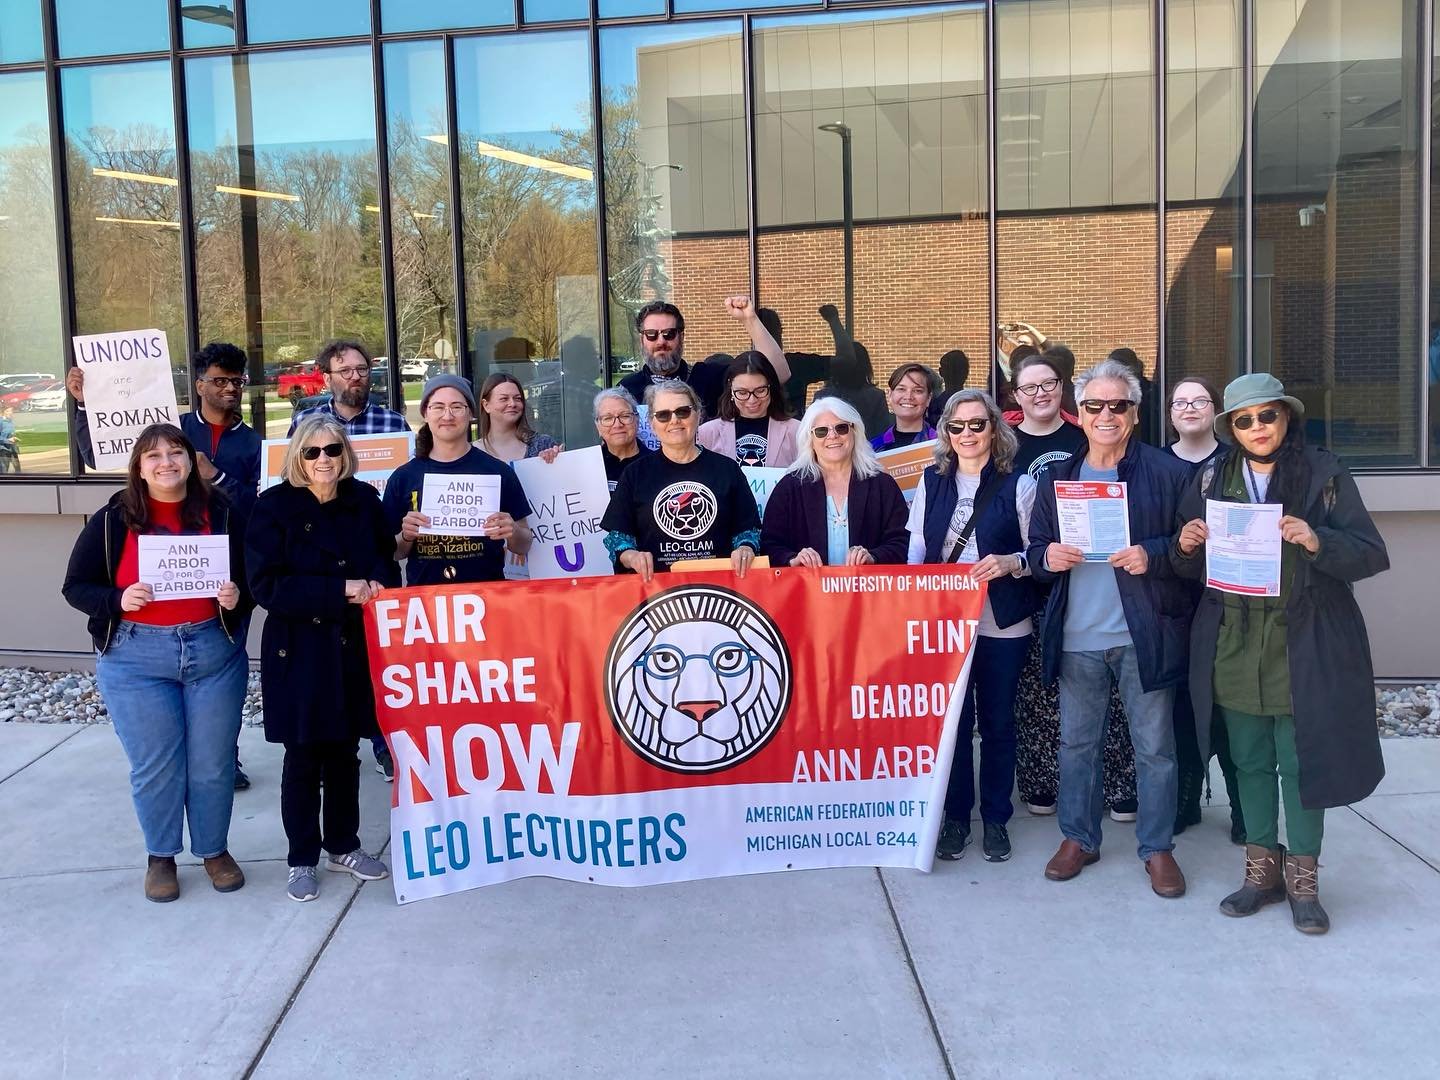 Lecturers at #UMDearborn celebrating the Tony England building renaming while also passing out literature showing how little money we get paid for teaching a majority of the undergraduate classes. Chancellor Grasso got a 22% this year while #UMich is